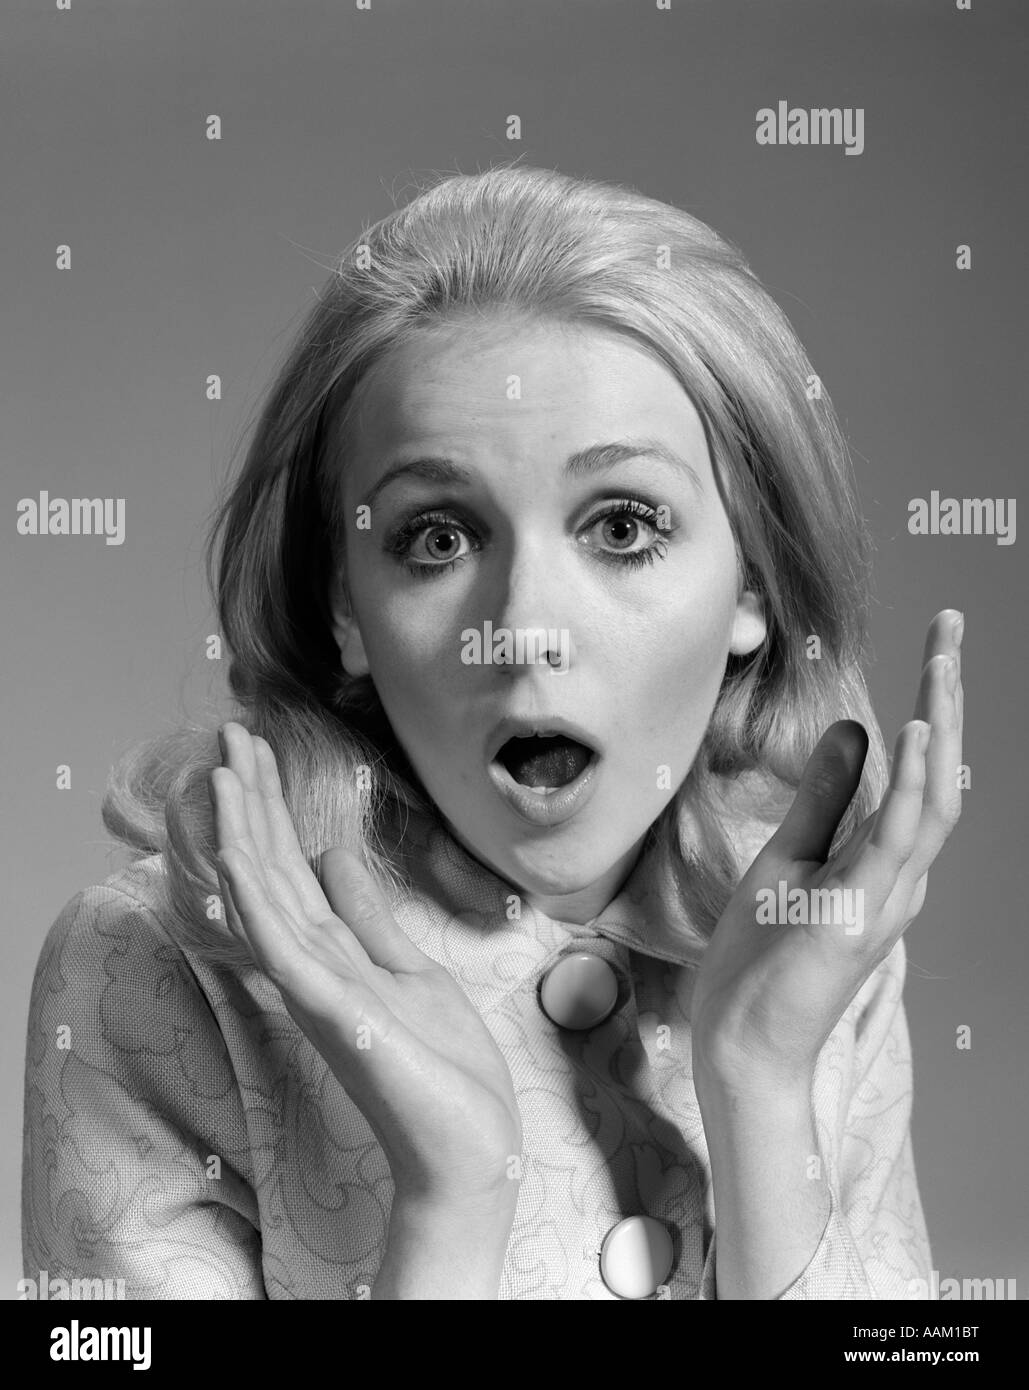 1960s BLOND WOMAN HANDS UP FRAMING FACE EXPRESSION OF SURPRISE AWE SHOCK LOOKING AT CAMERA Stock Photo